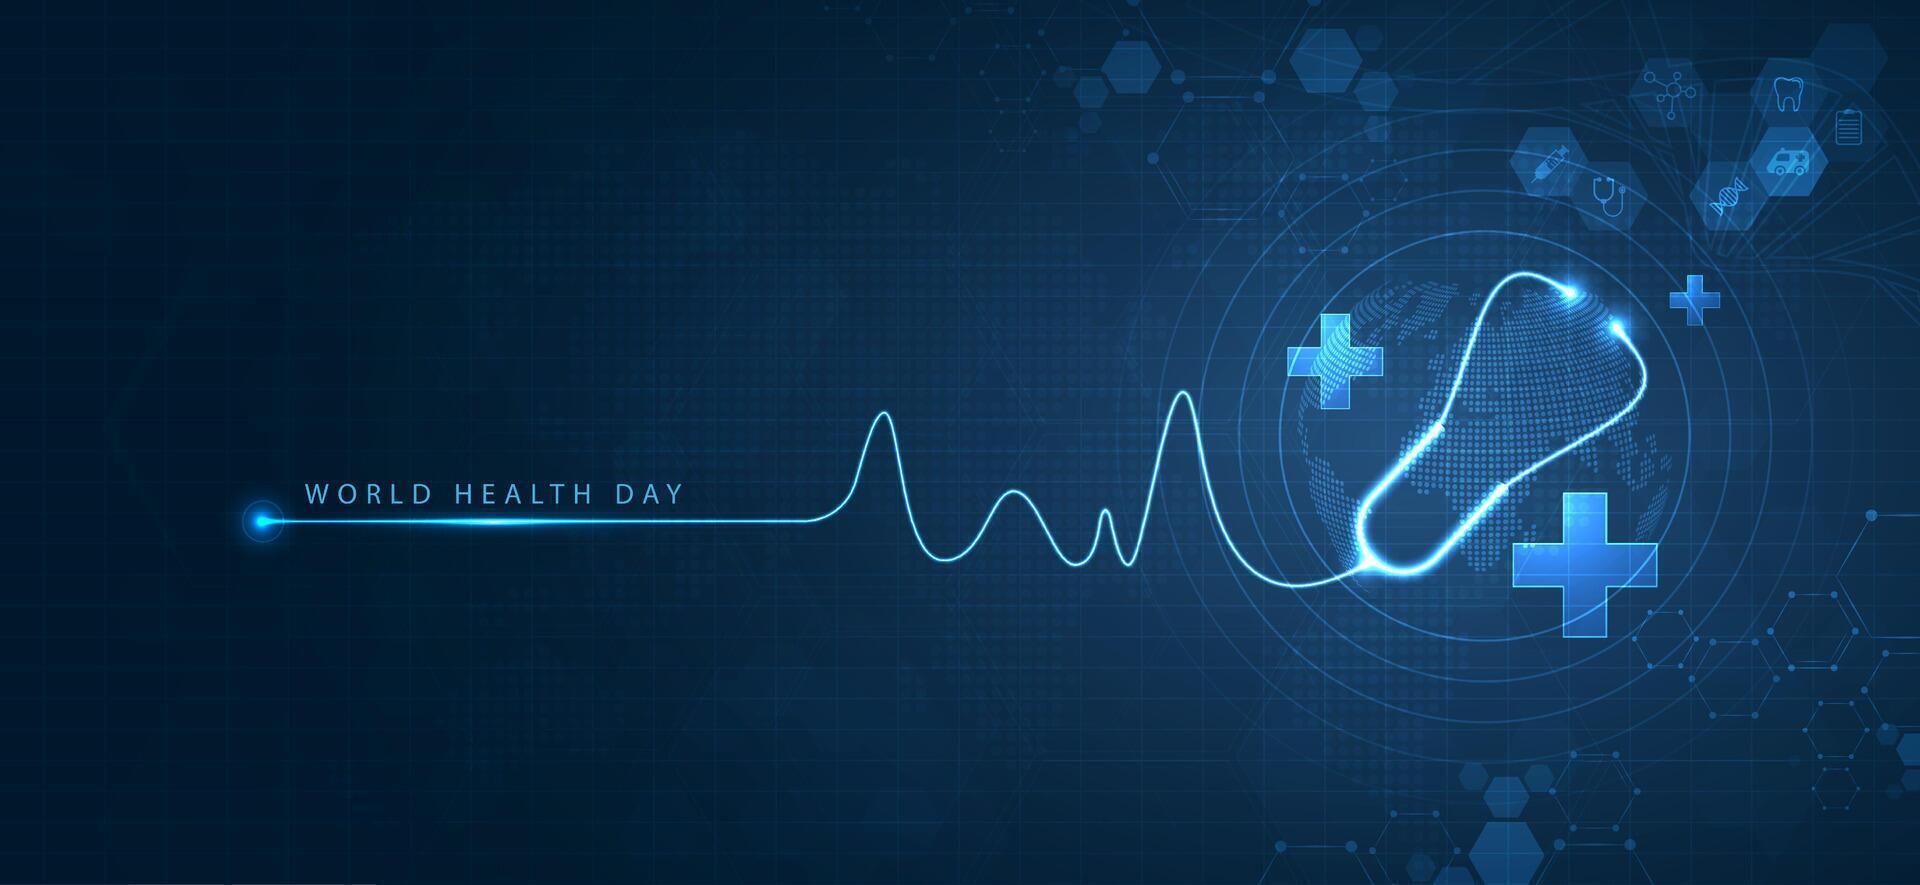 World Health Day is a global health awareness day celebrated every year on 7th April. health care medical science with icon digital technology world concept modern business. vector design